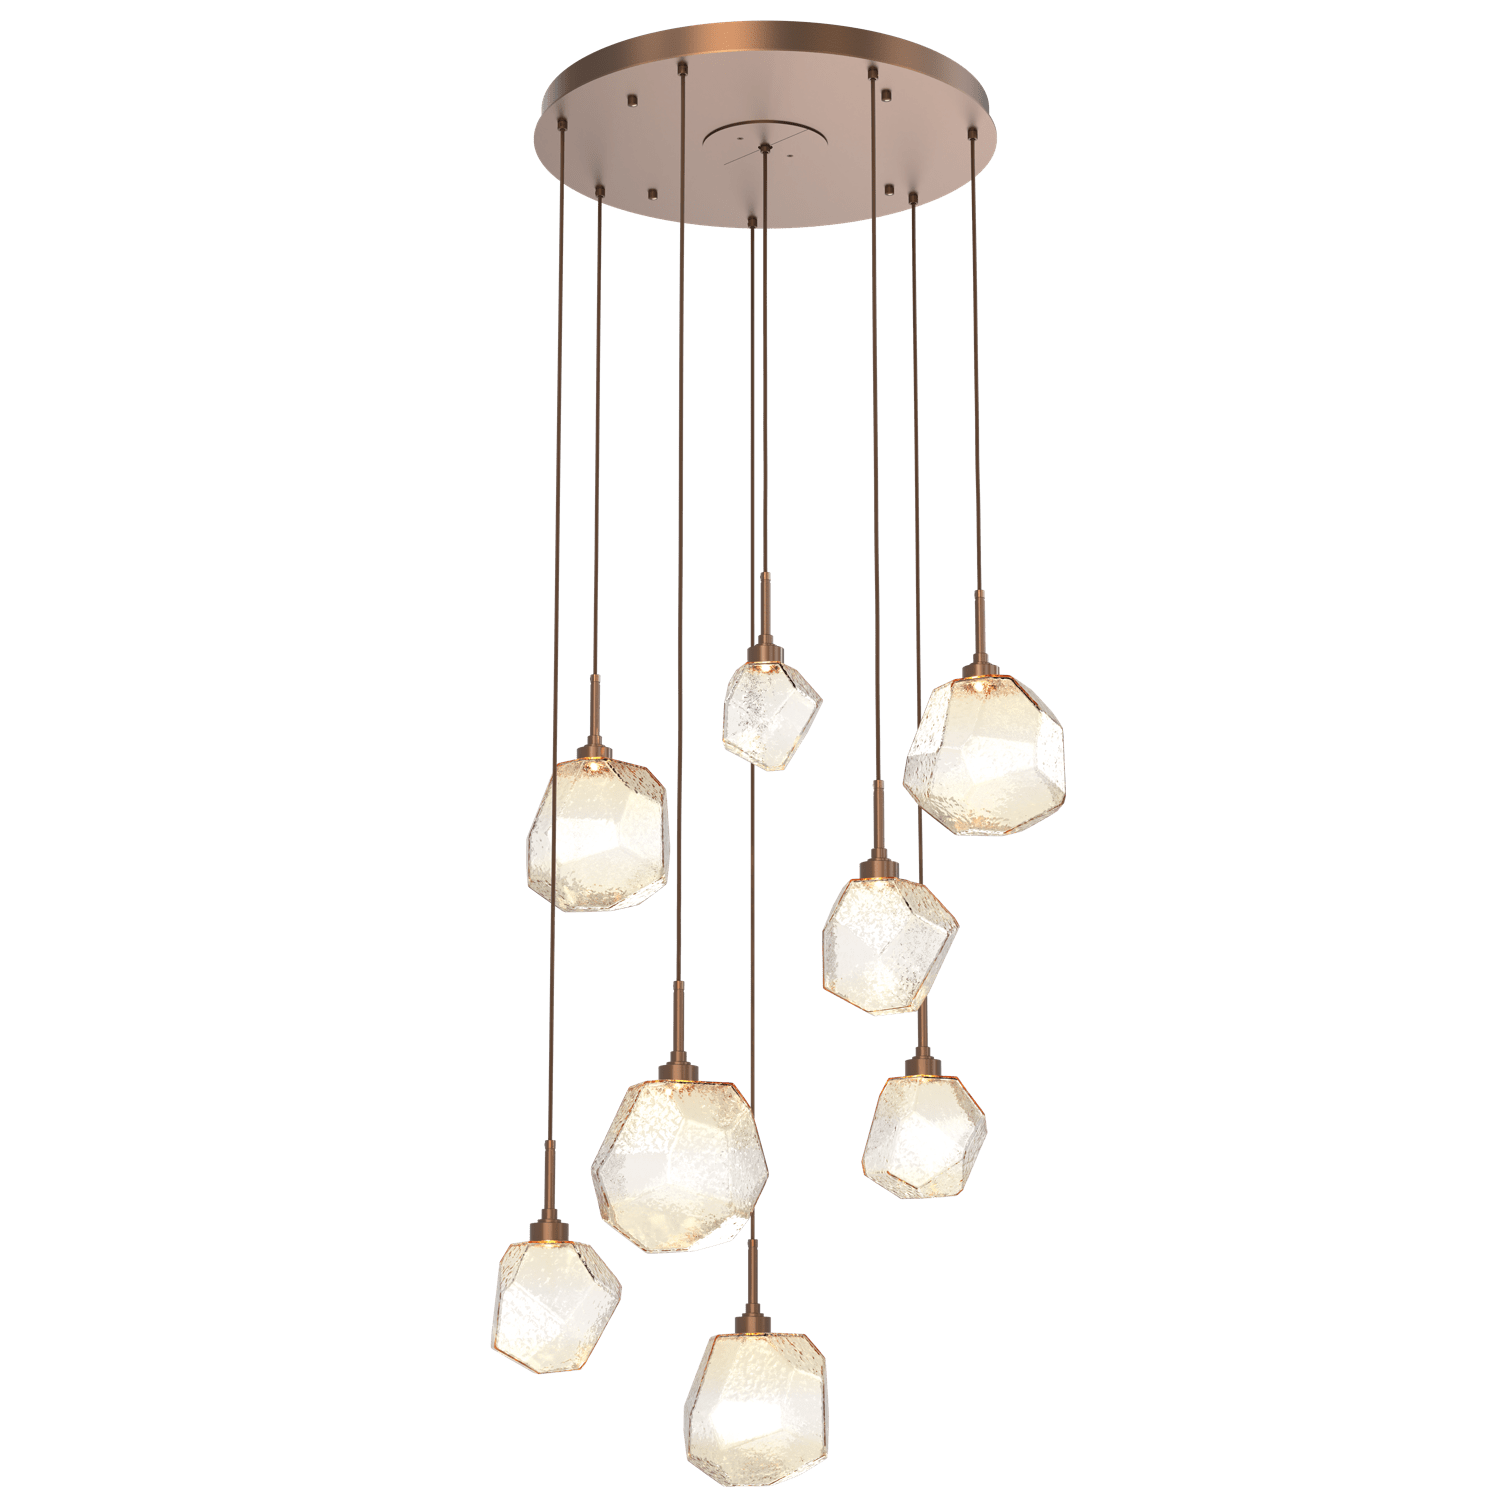 CHB0039-08-BB-A-Hammerton-Studio-Gem-8-light-round-pendant-chandelier-with-burnished-bronze-finish-and-amber-blown-glass-shades-and-LED-lamping